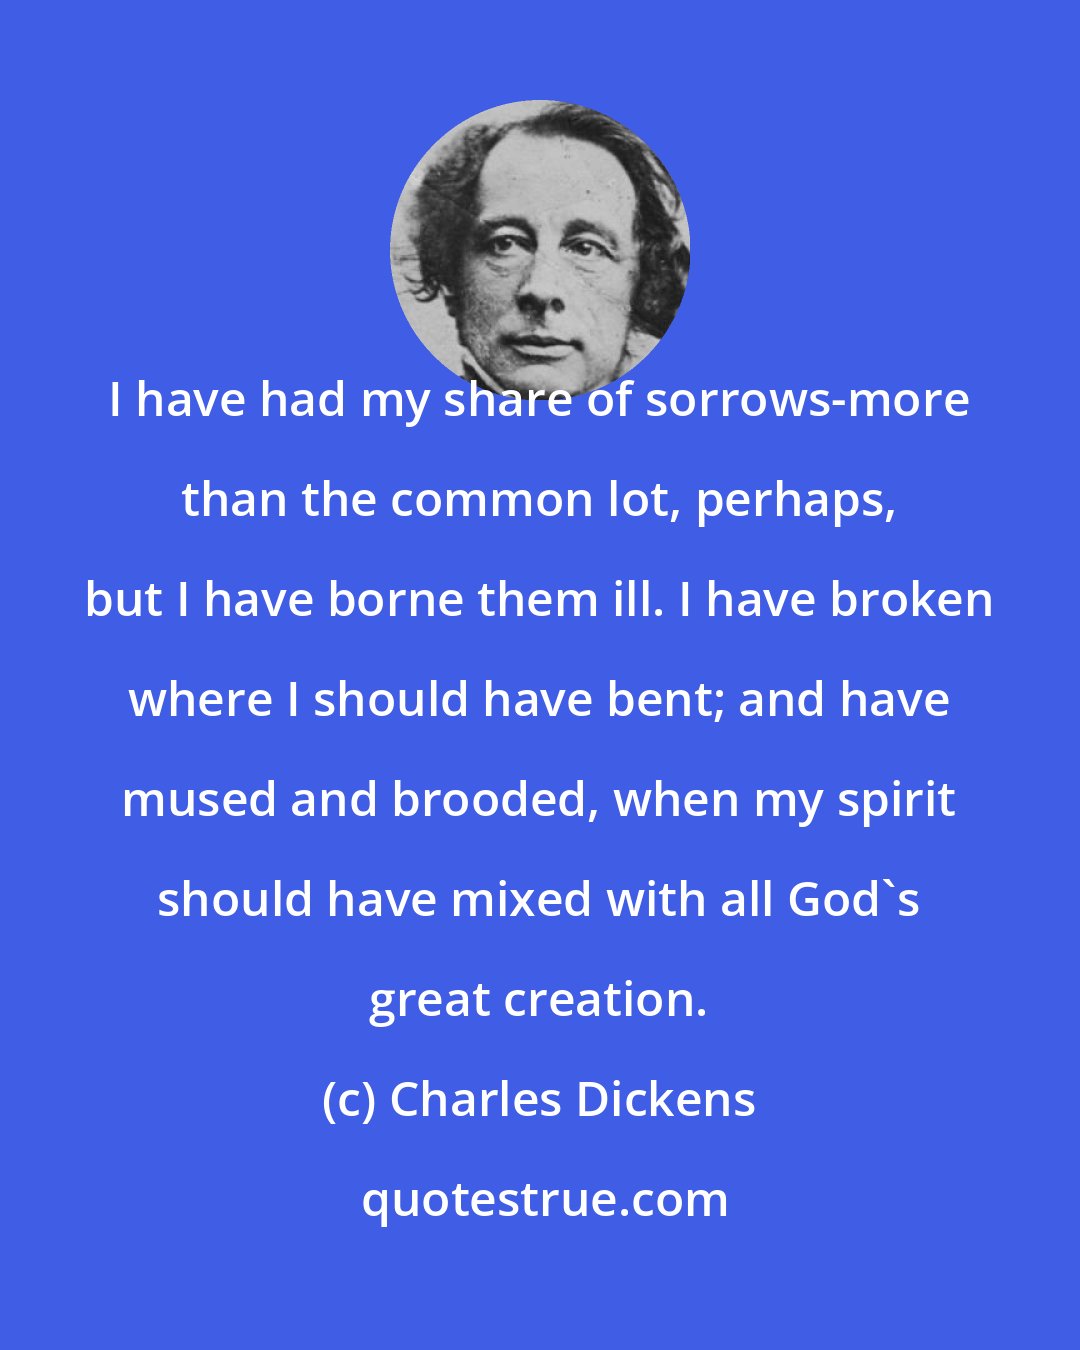 Charles Dickens: I have had my share of sorrows-more than the common lot, perhaps, but I have borne them ill. I have broken where I should have bent; and have mused and brooded, when my spirit should have mixed with all God's great creation.